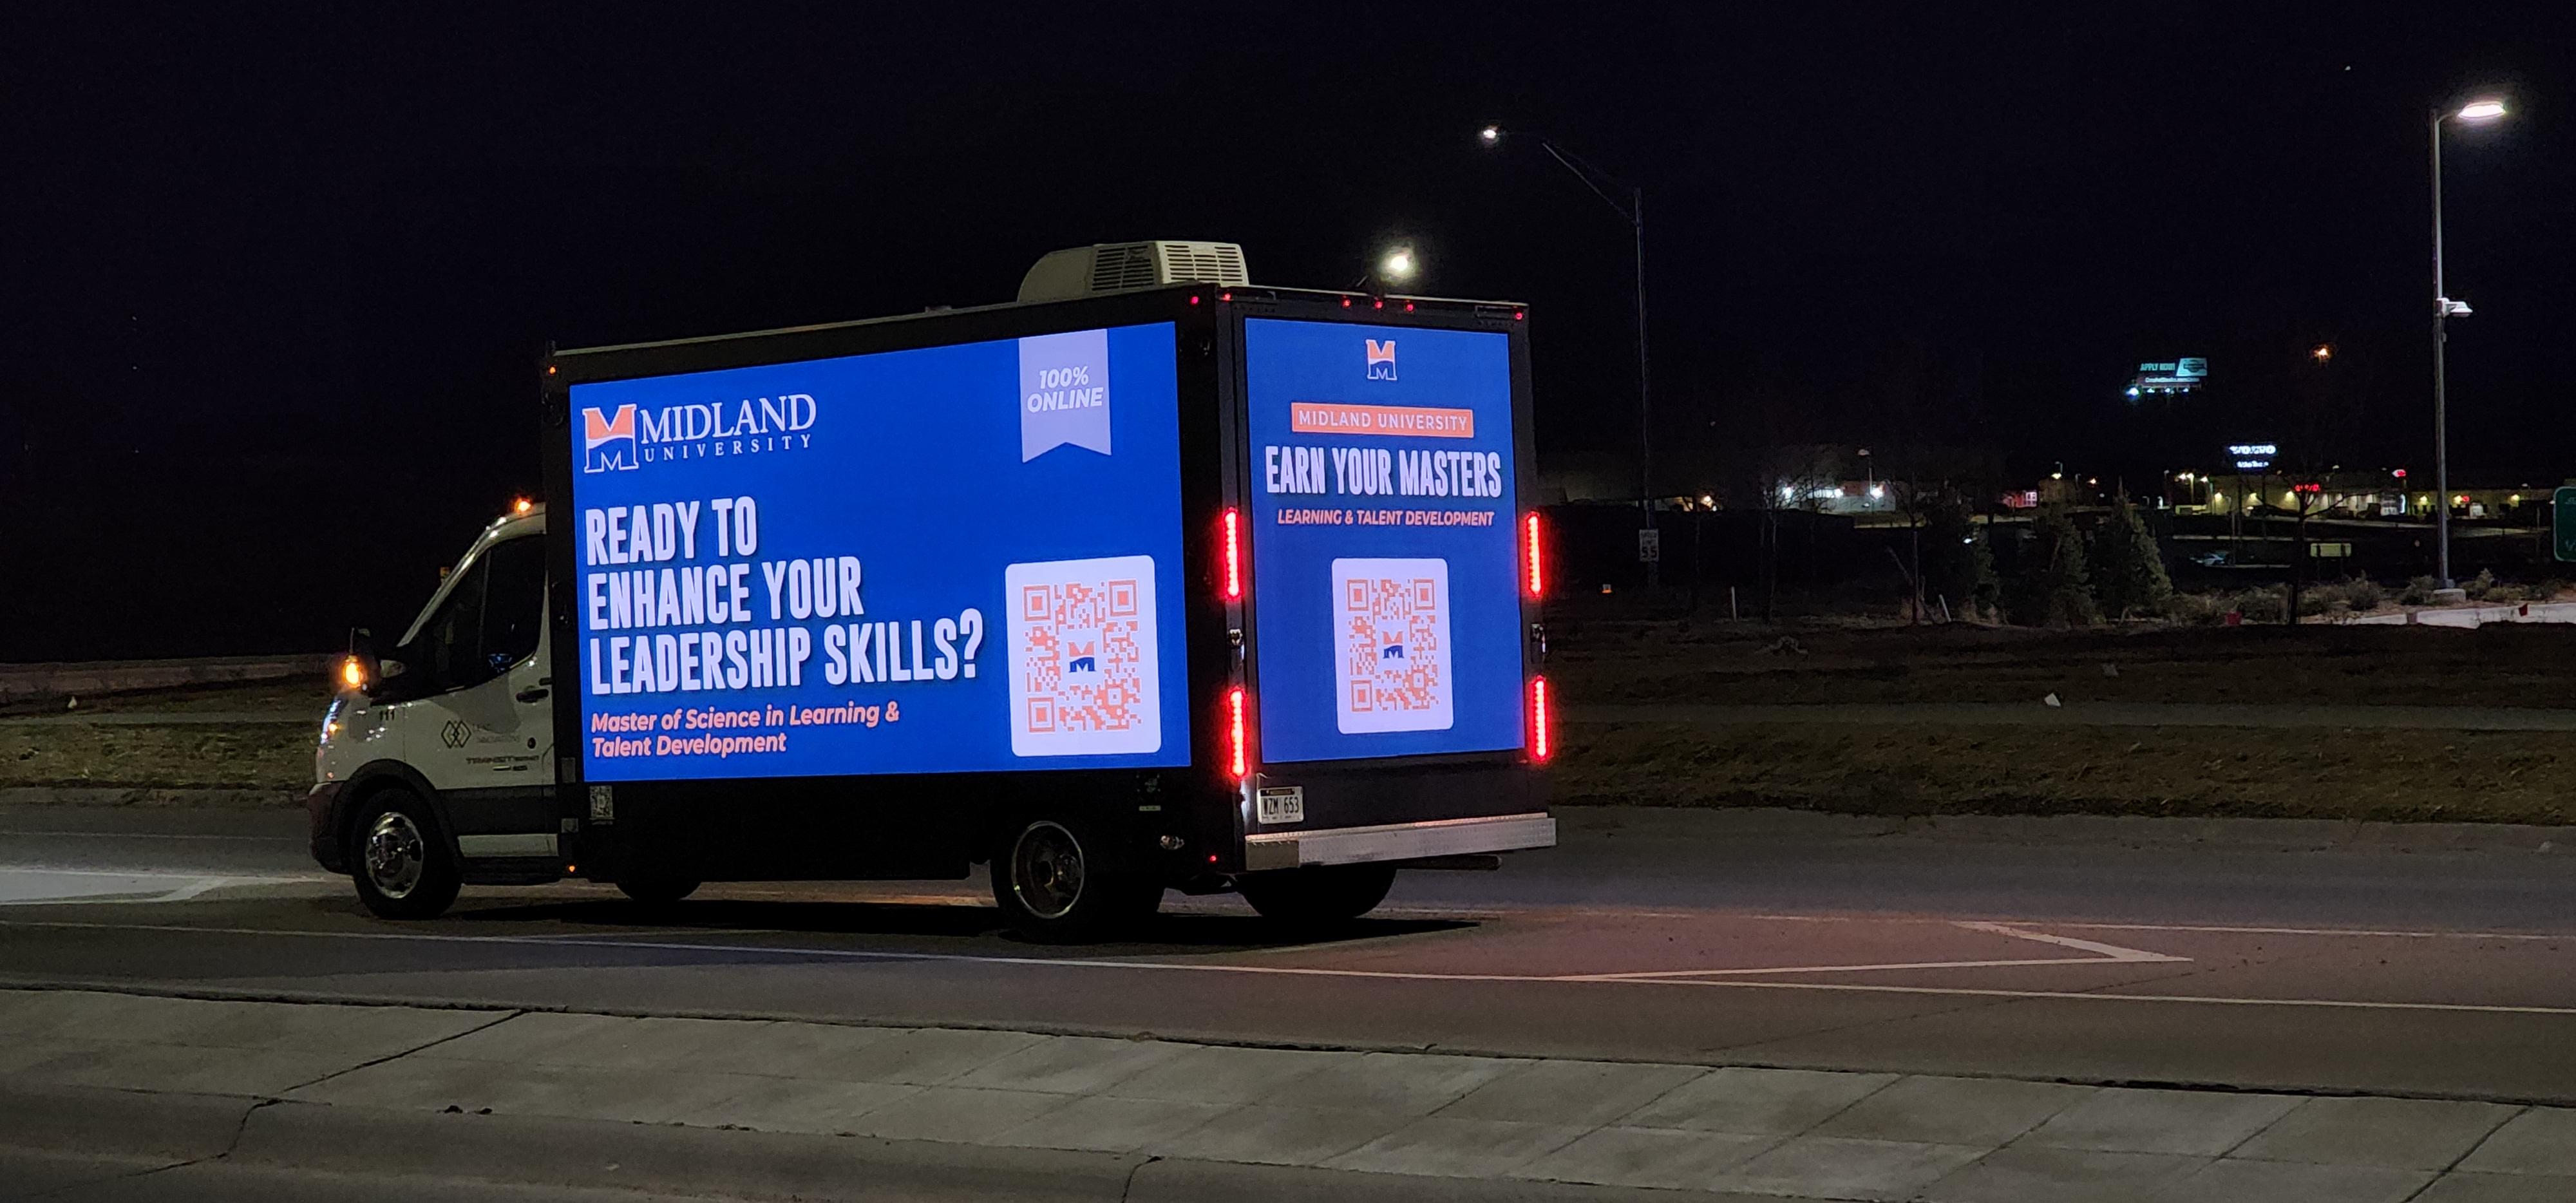 Lead Innovations mobile digital billboard truck in Omaha NE with with advertisement for Midlands University